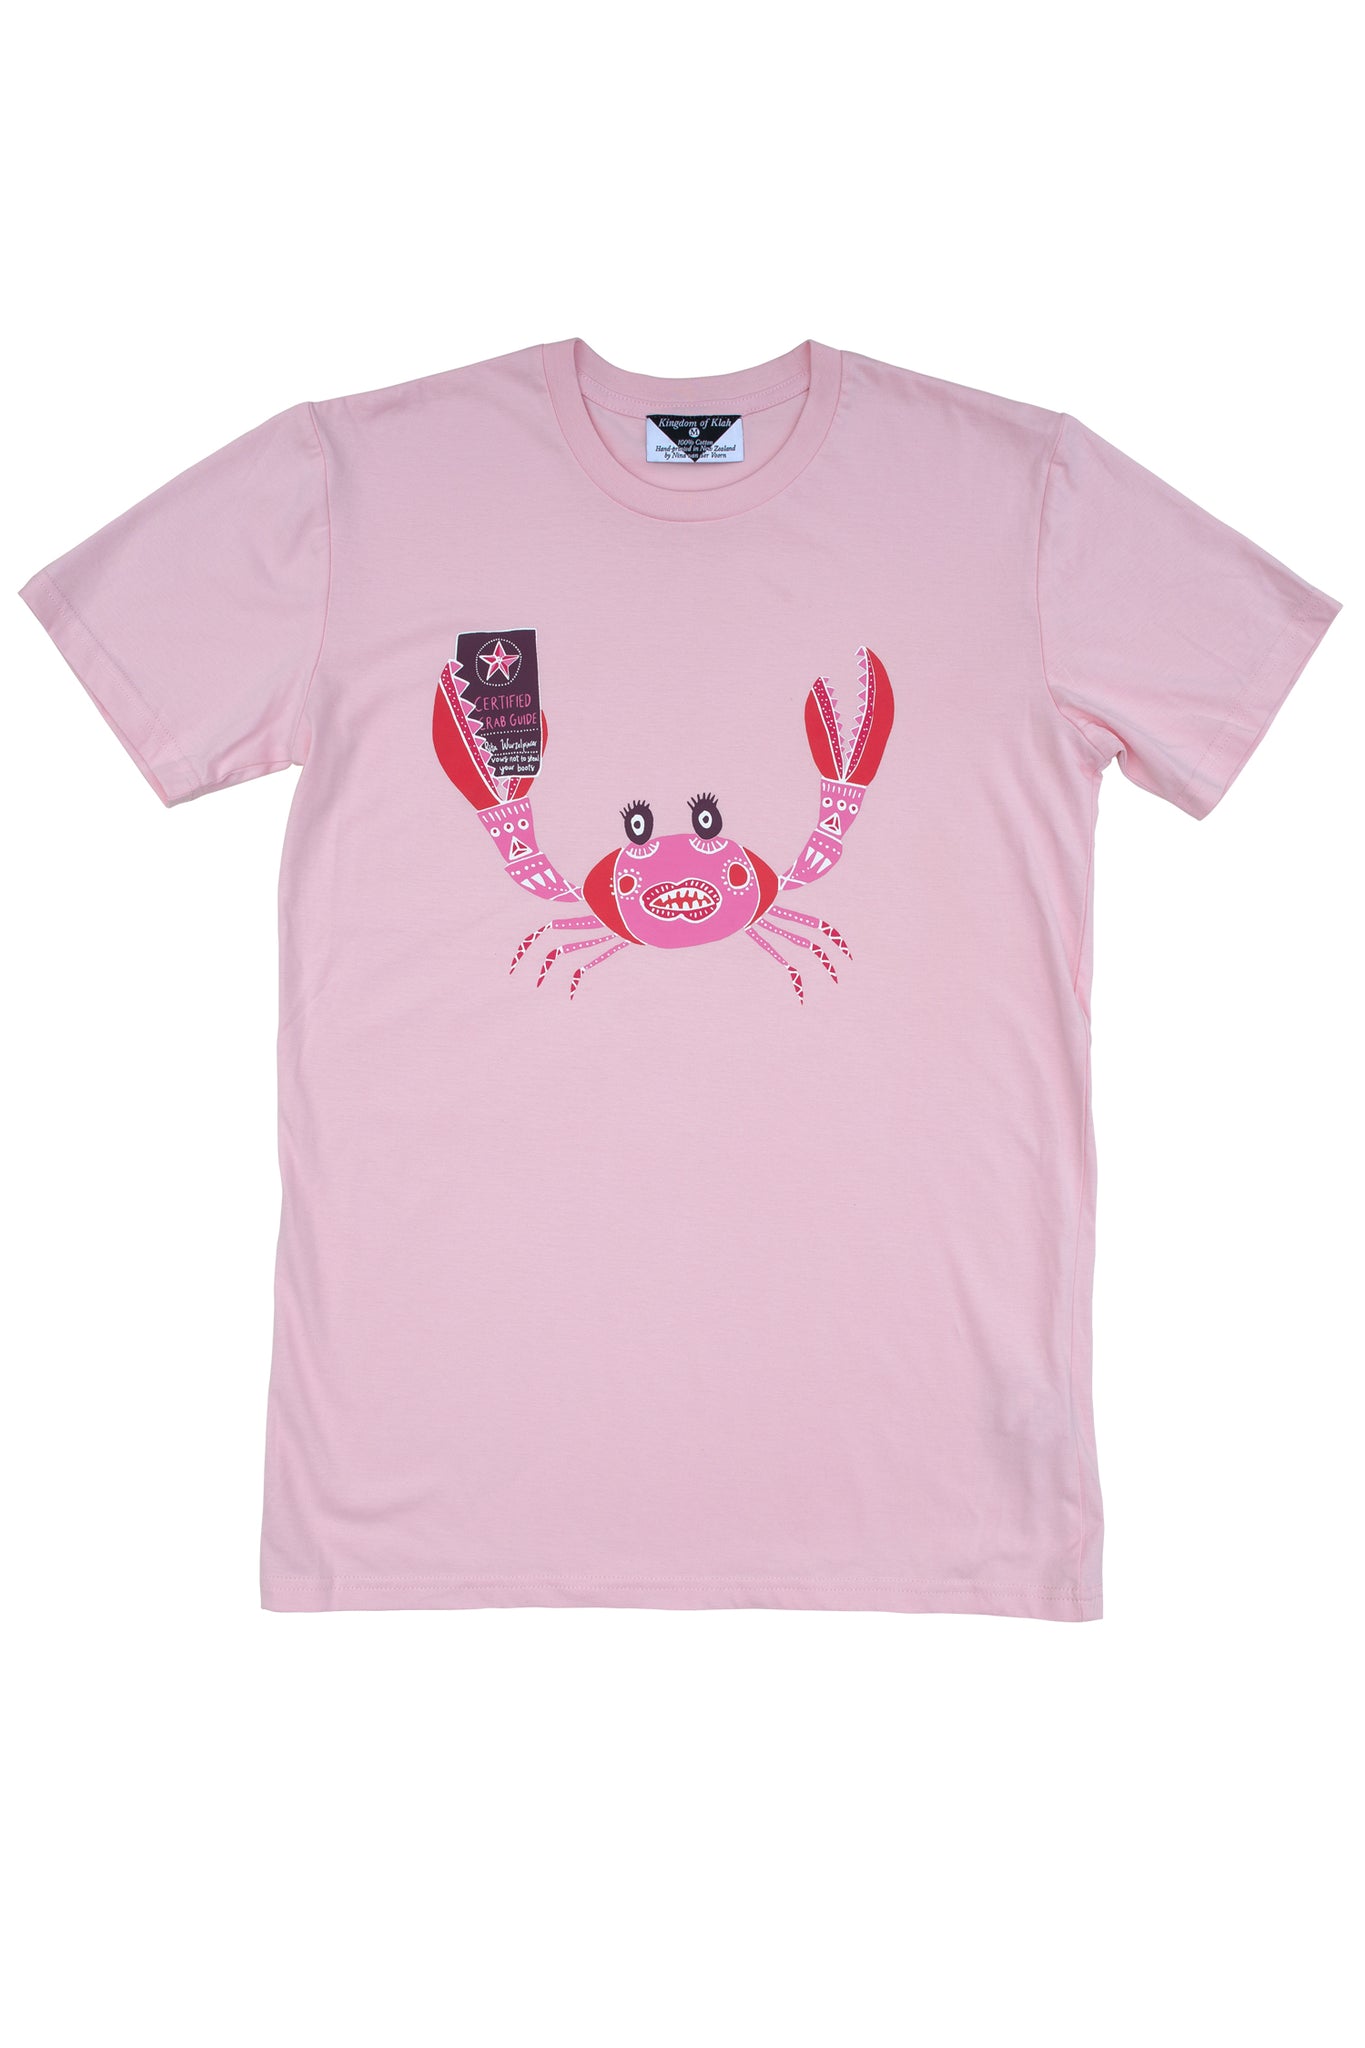 The Certified Crab Guides of Klah Men's Sovereign Tee, Pink